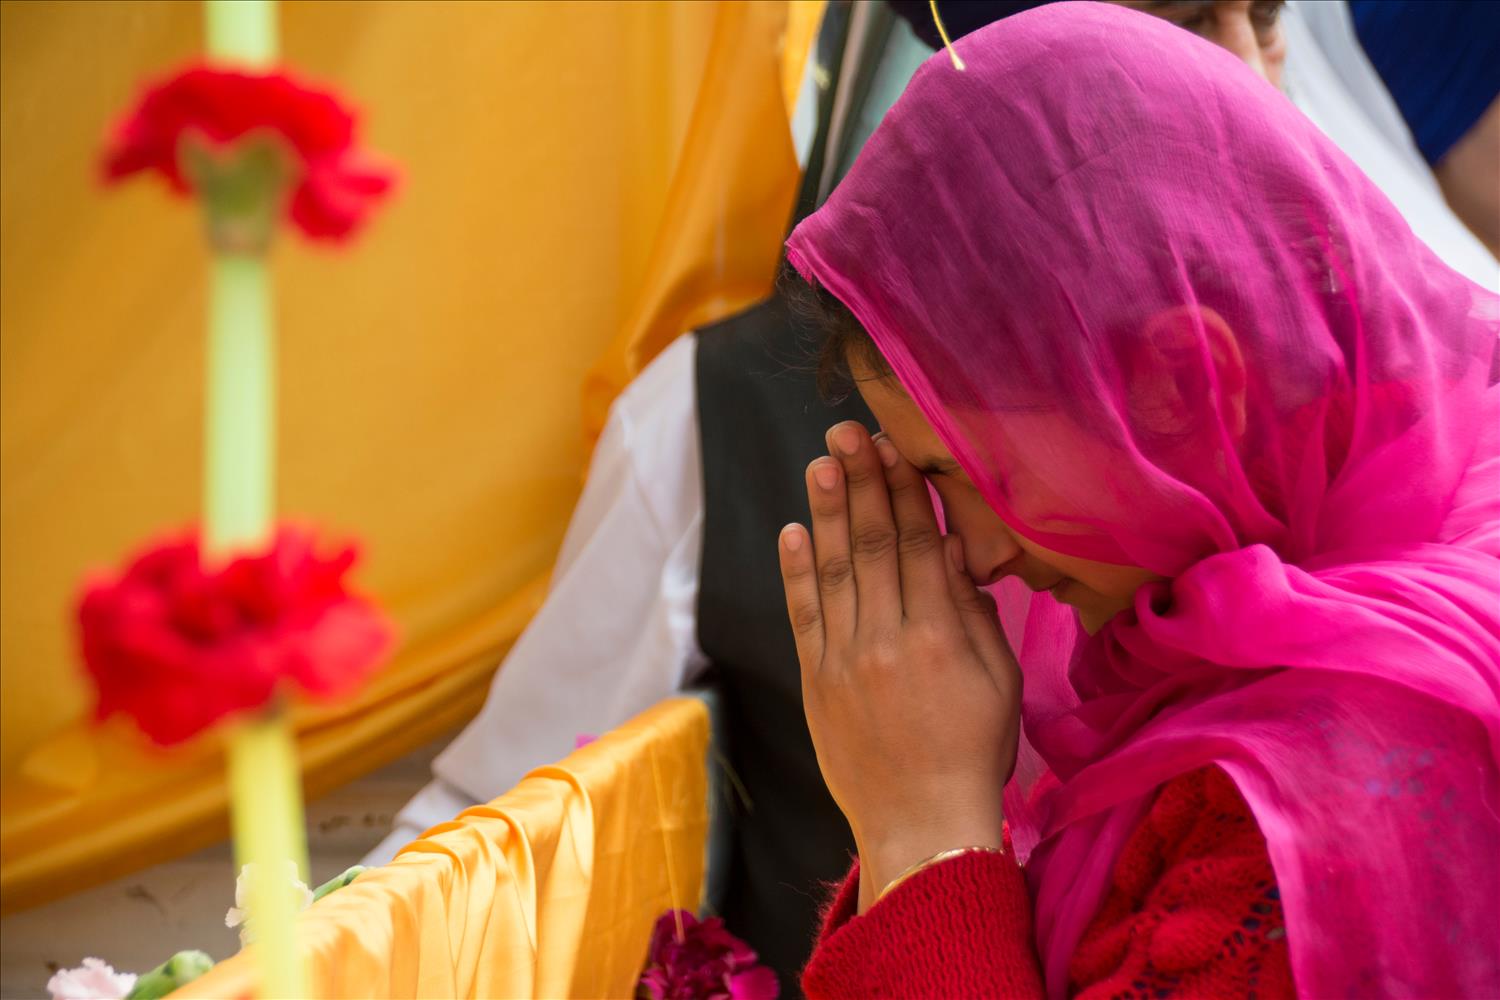 Domestic Abuse And Mental Health Remain Taboo Subjects For Many Sikhs  With Deadly Consequences